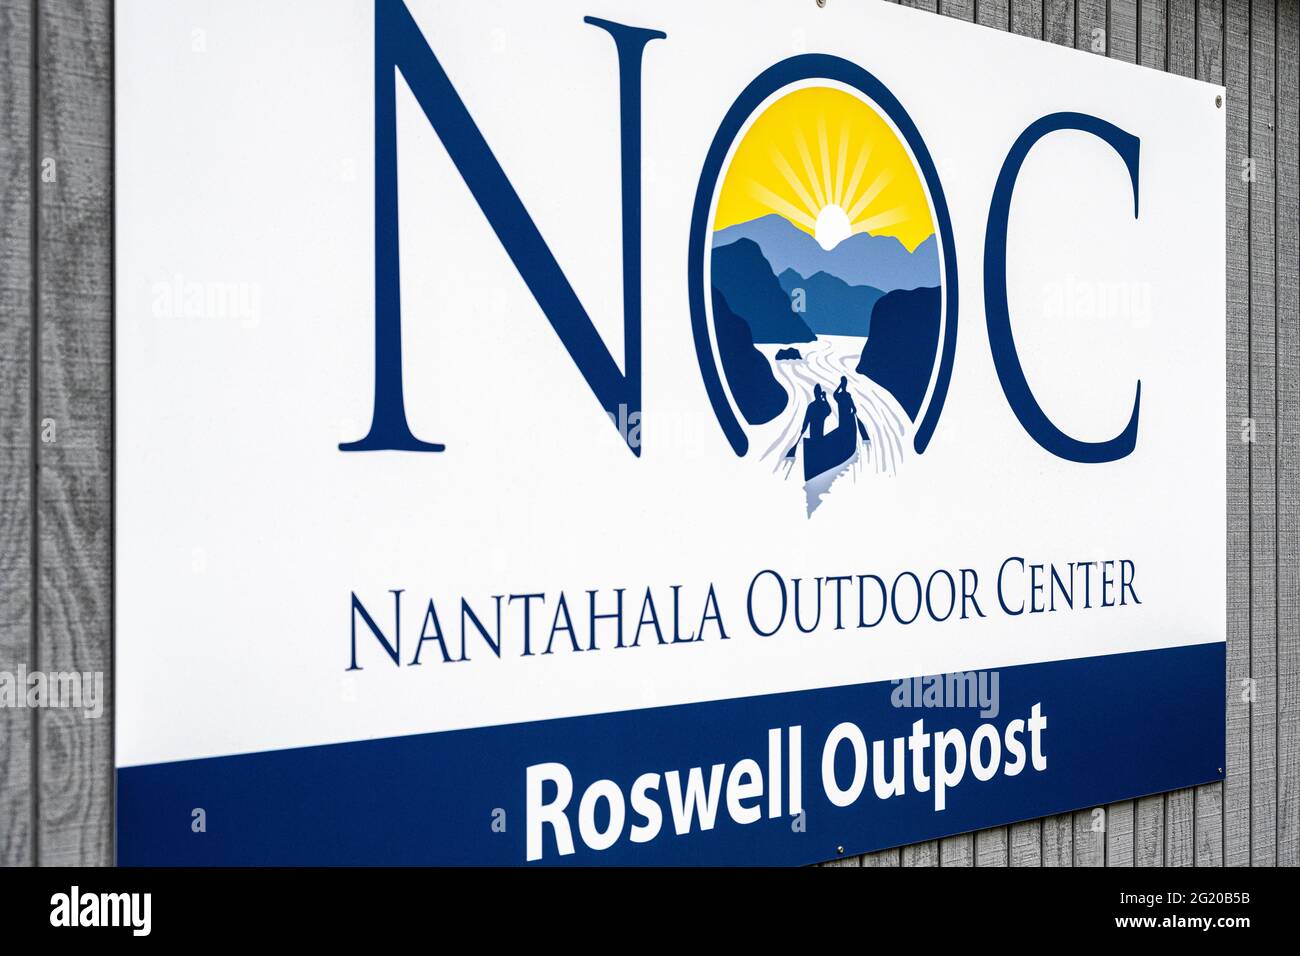 Nantahala Outdoor Center Roswell Outpost provides kayak and canoe rentals for exploring the Chattahoochee River National Recreation Area. (USA) Stock Photo